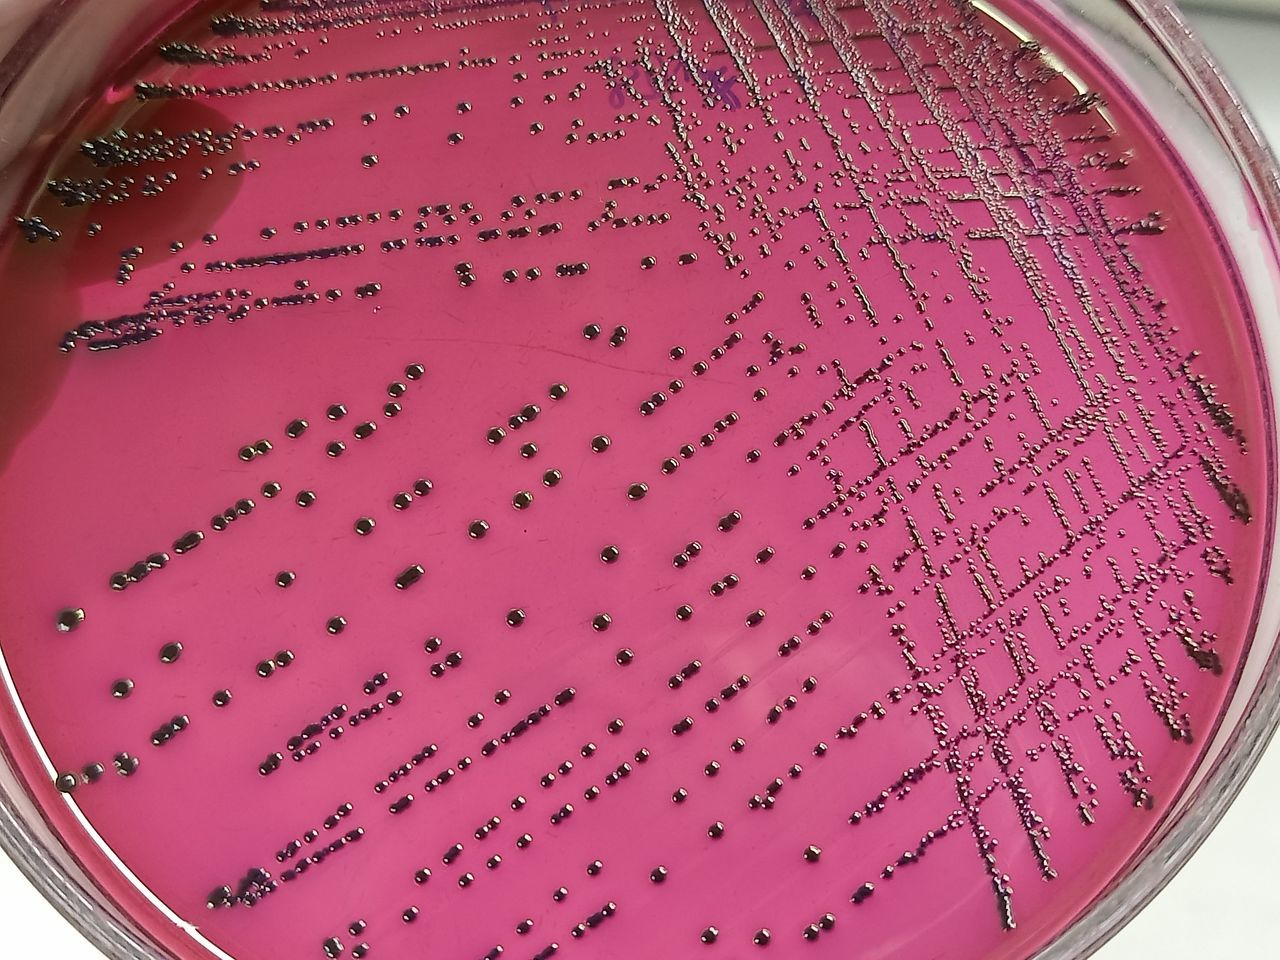 pink, purple, biology, education, science, circle, human eye, indoors, magenta, research, healthcare and medicine, scientific experiment, microbiology, violet, petri dish, biochemistry, close-up, magnification